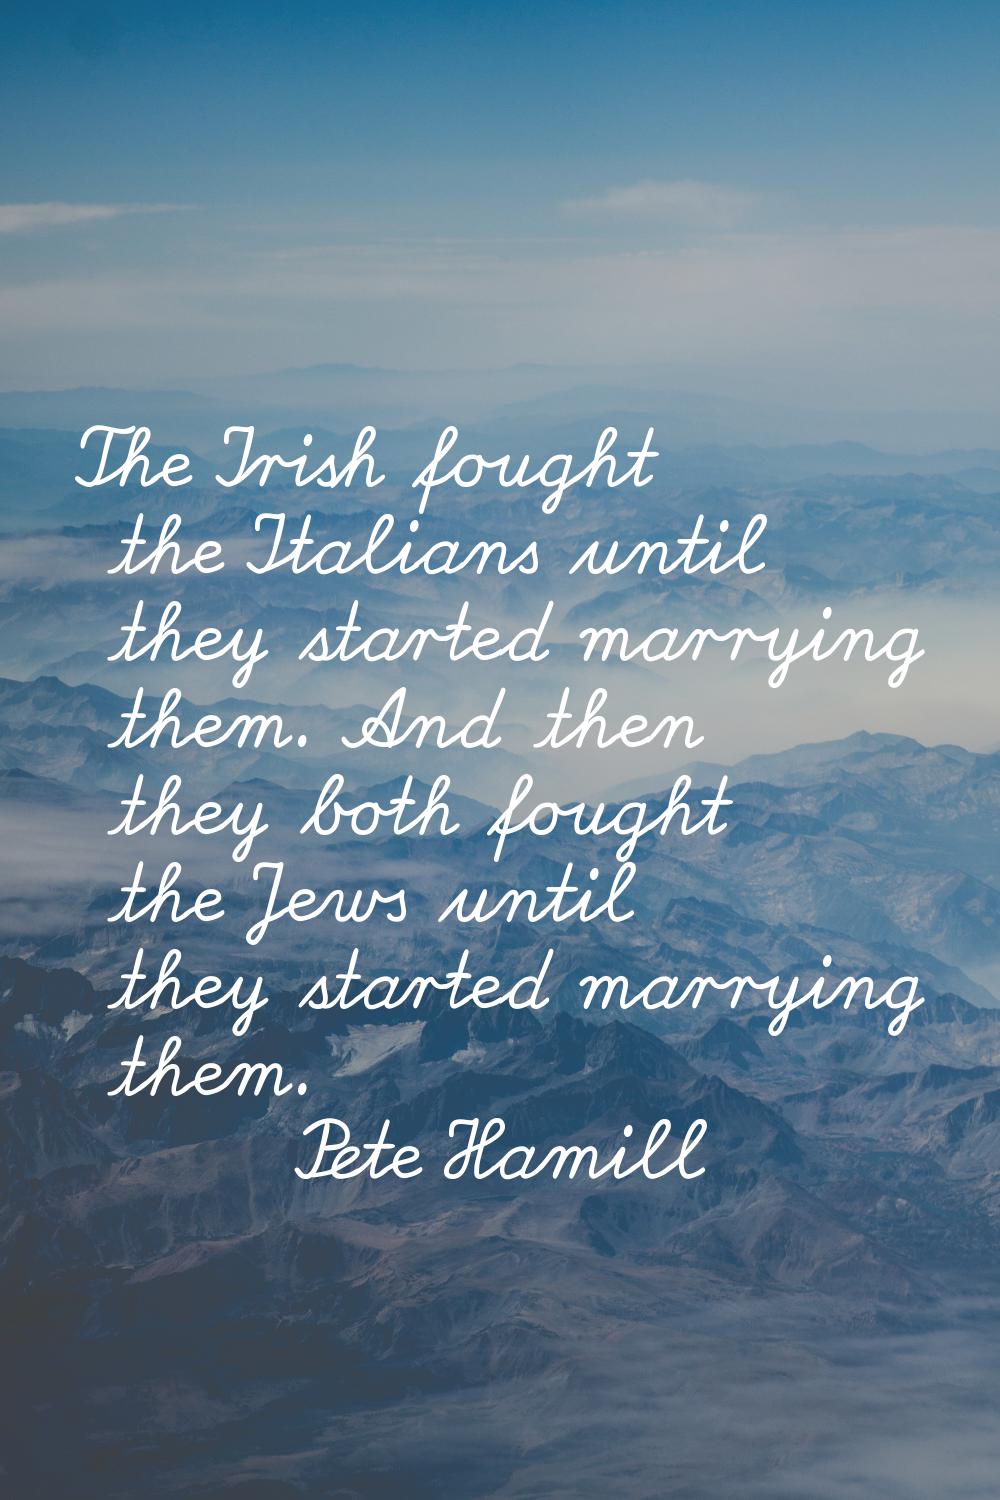 The Irish fought the Italians until they started marrying them. And then they both fought the Jews 